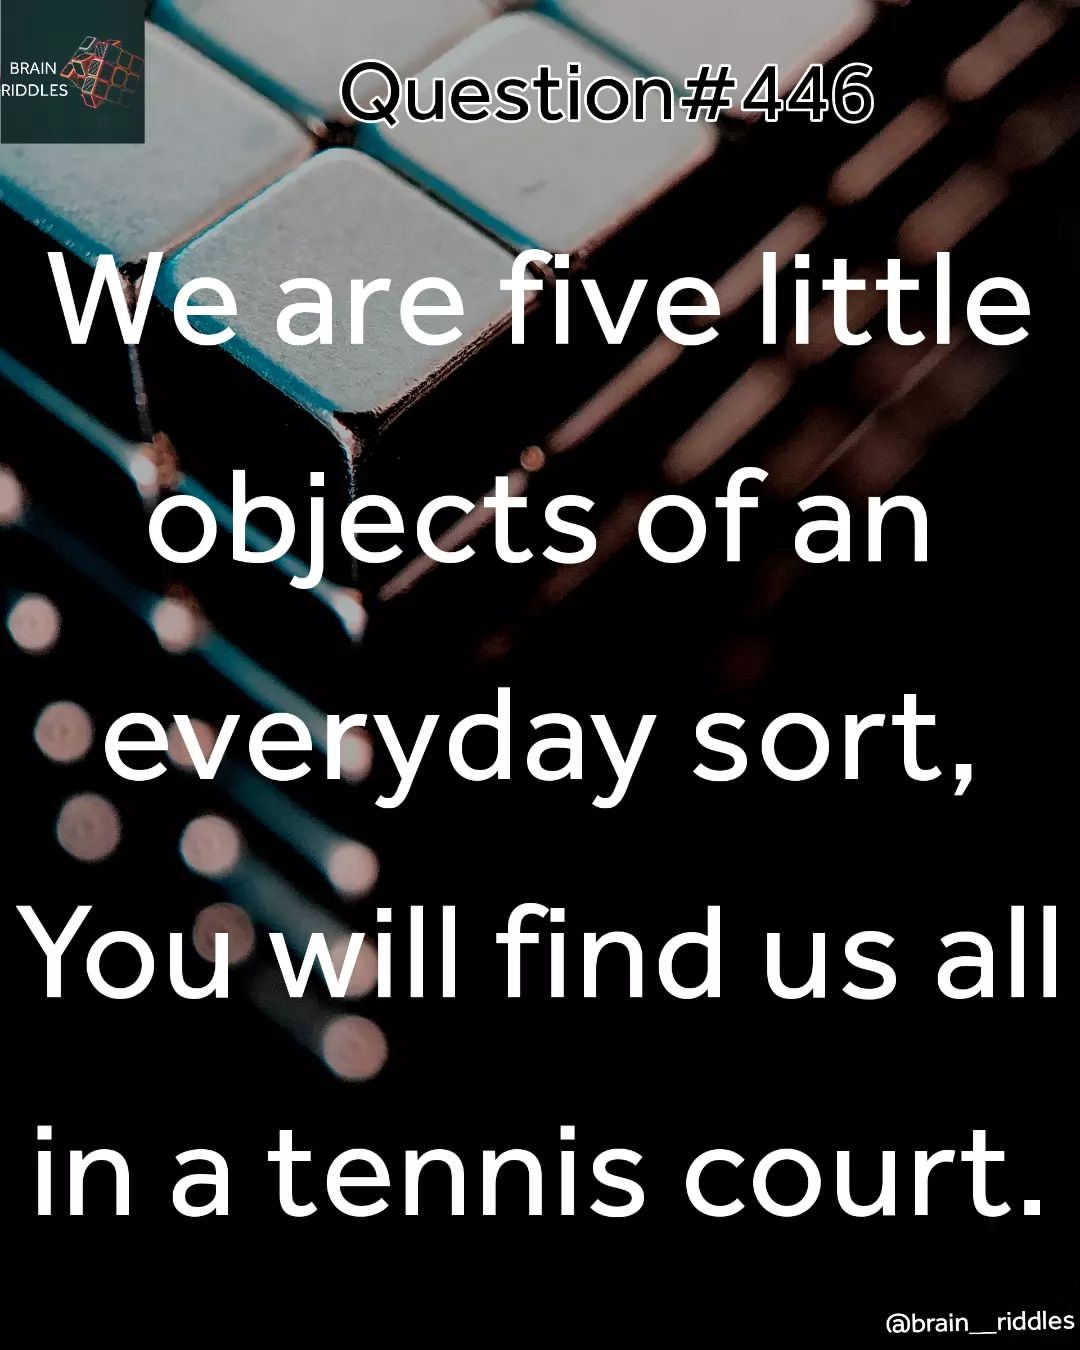 We are five little objects of an everyday sort. You will find us all in a tennis court.